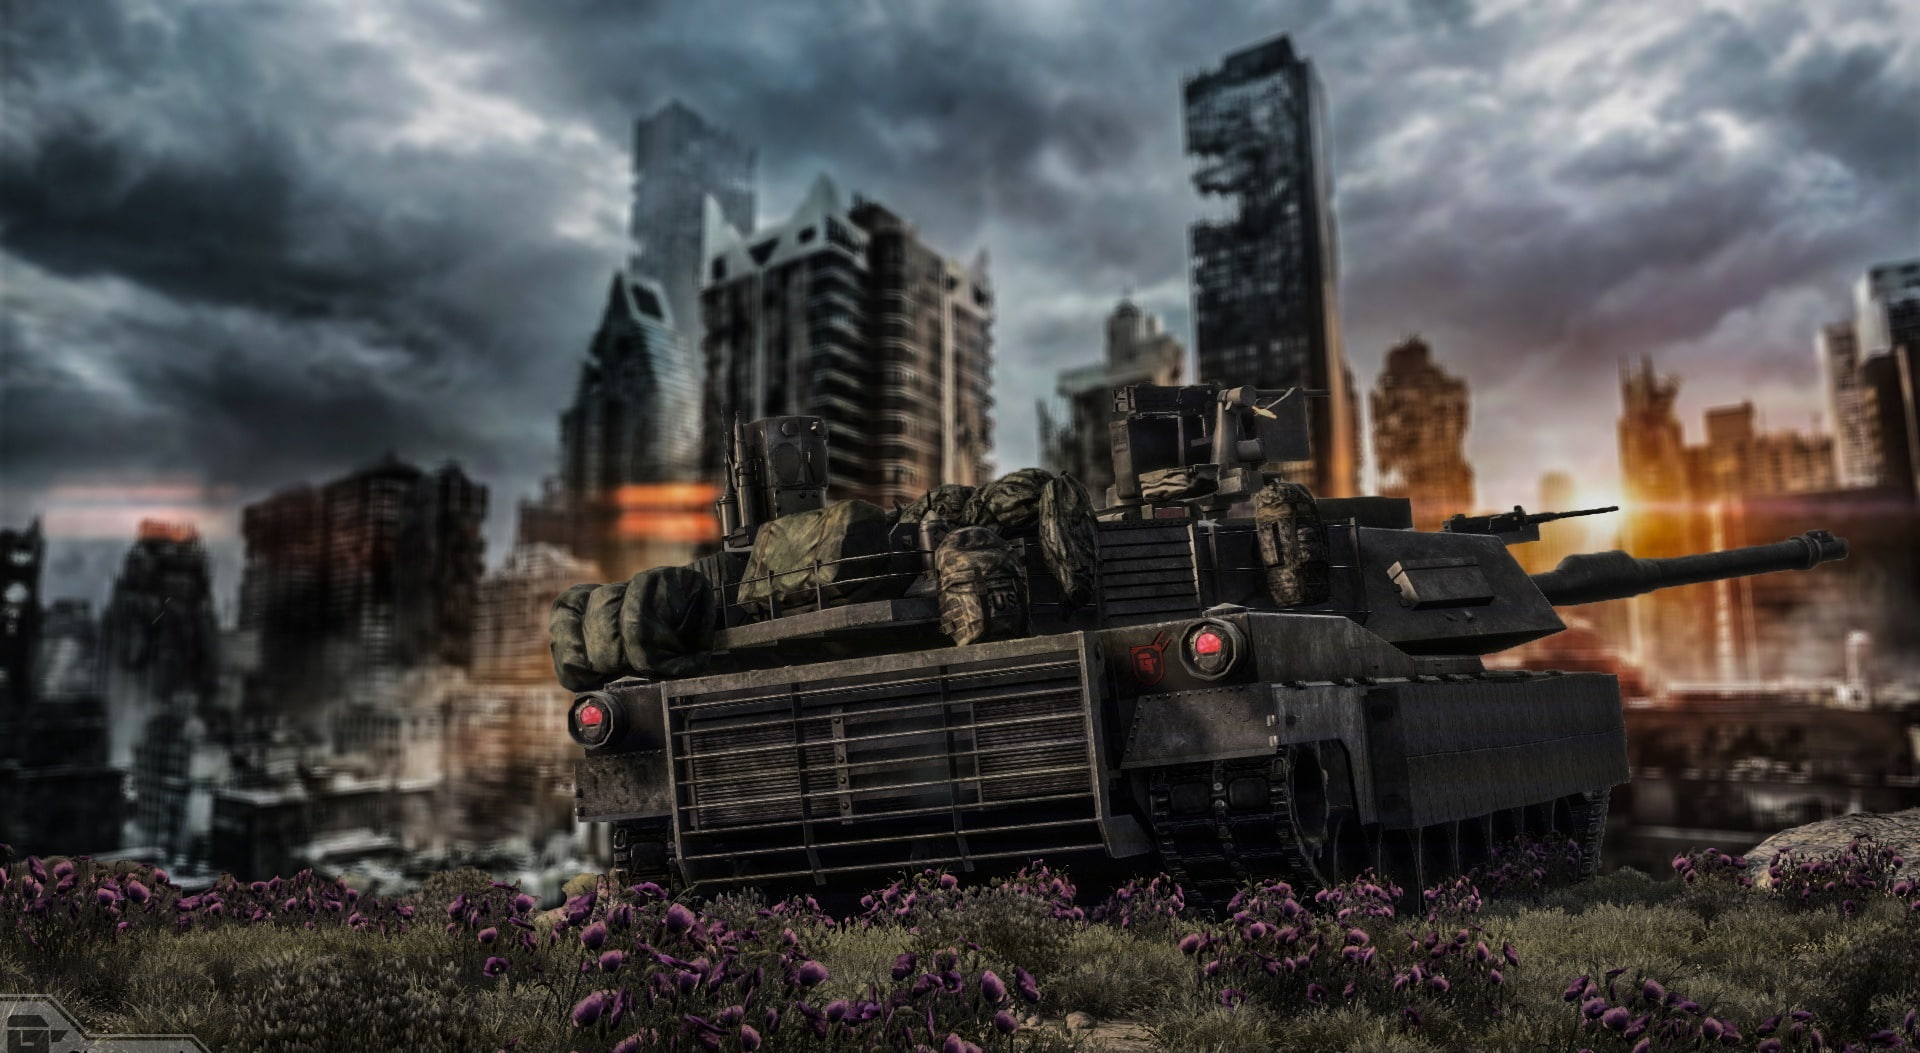 City of War, green battle tank, Army, soldiers, gtcinematic, m1 abrams